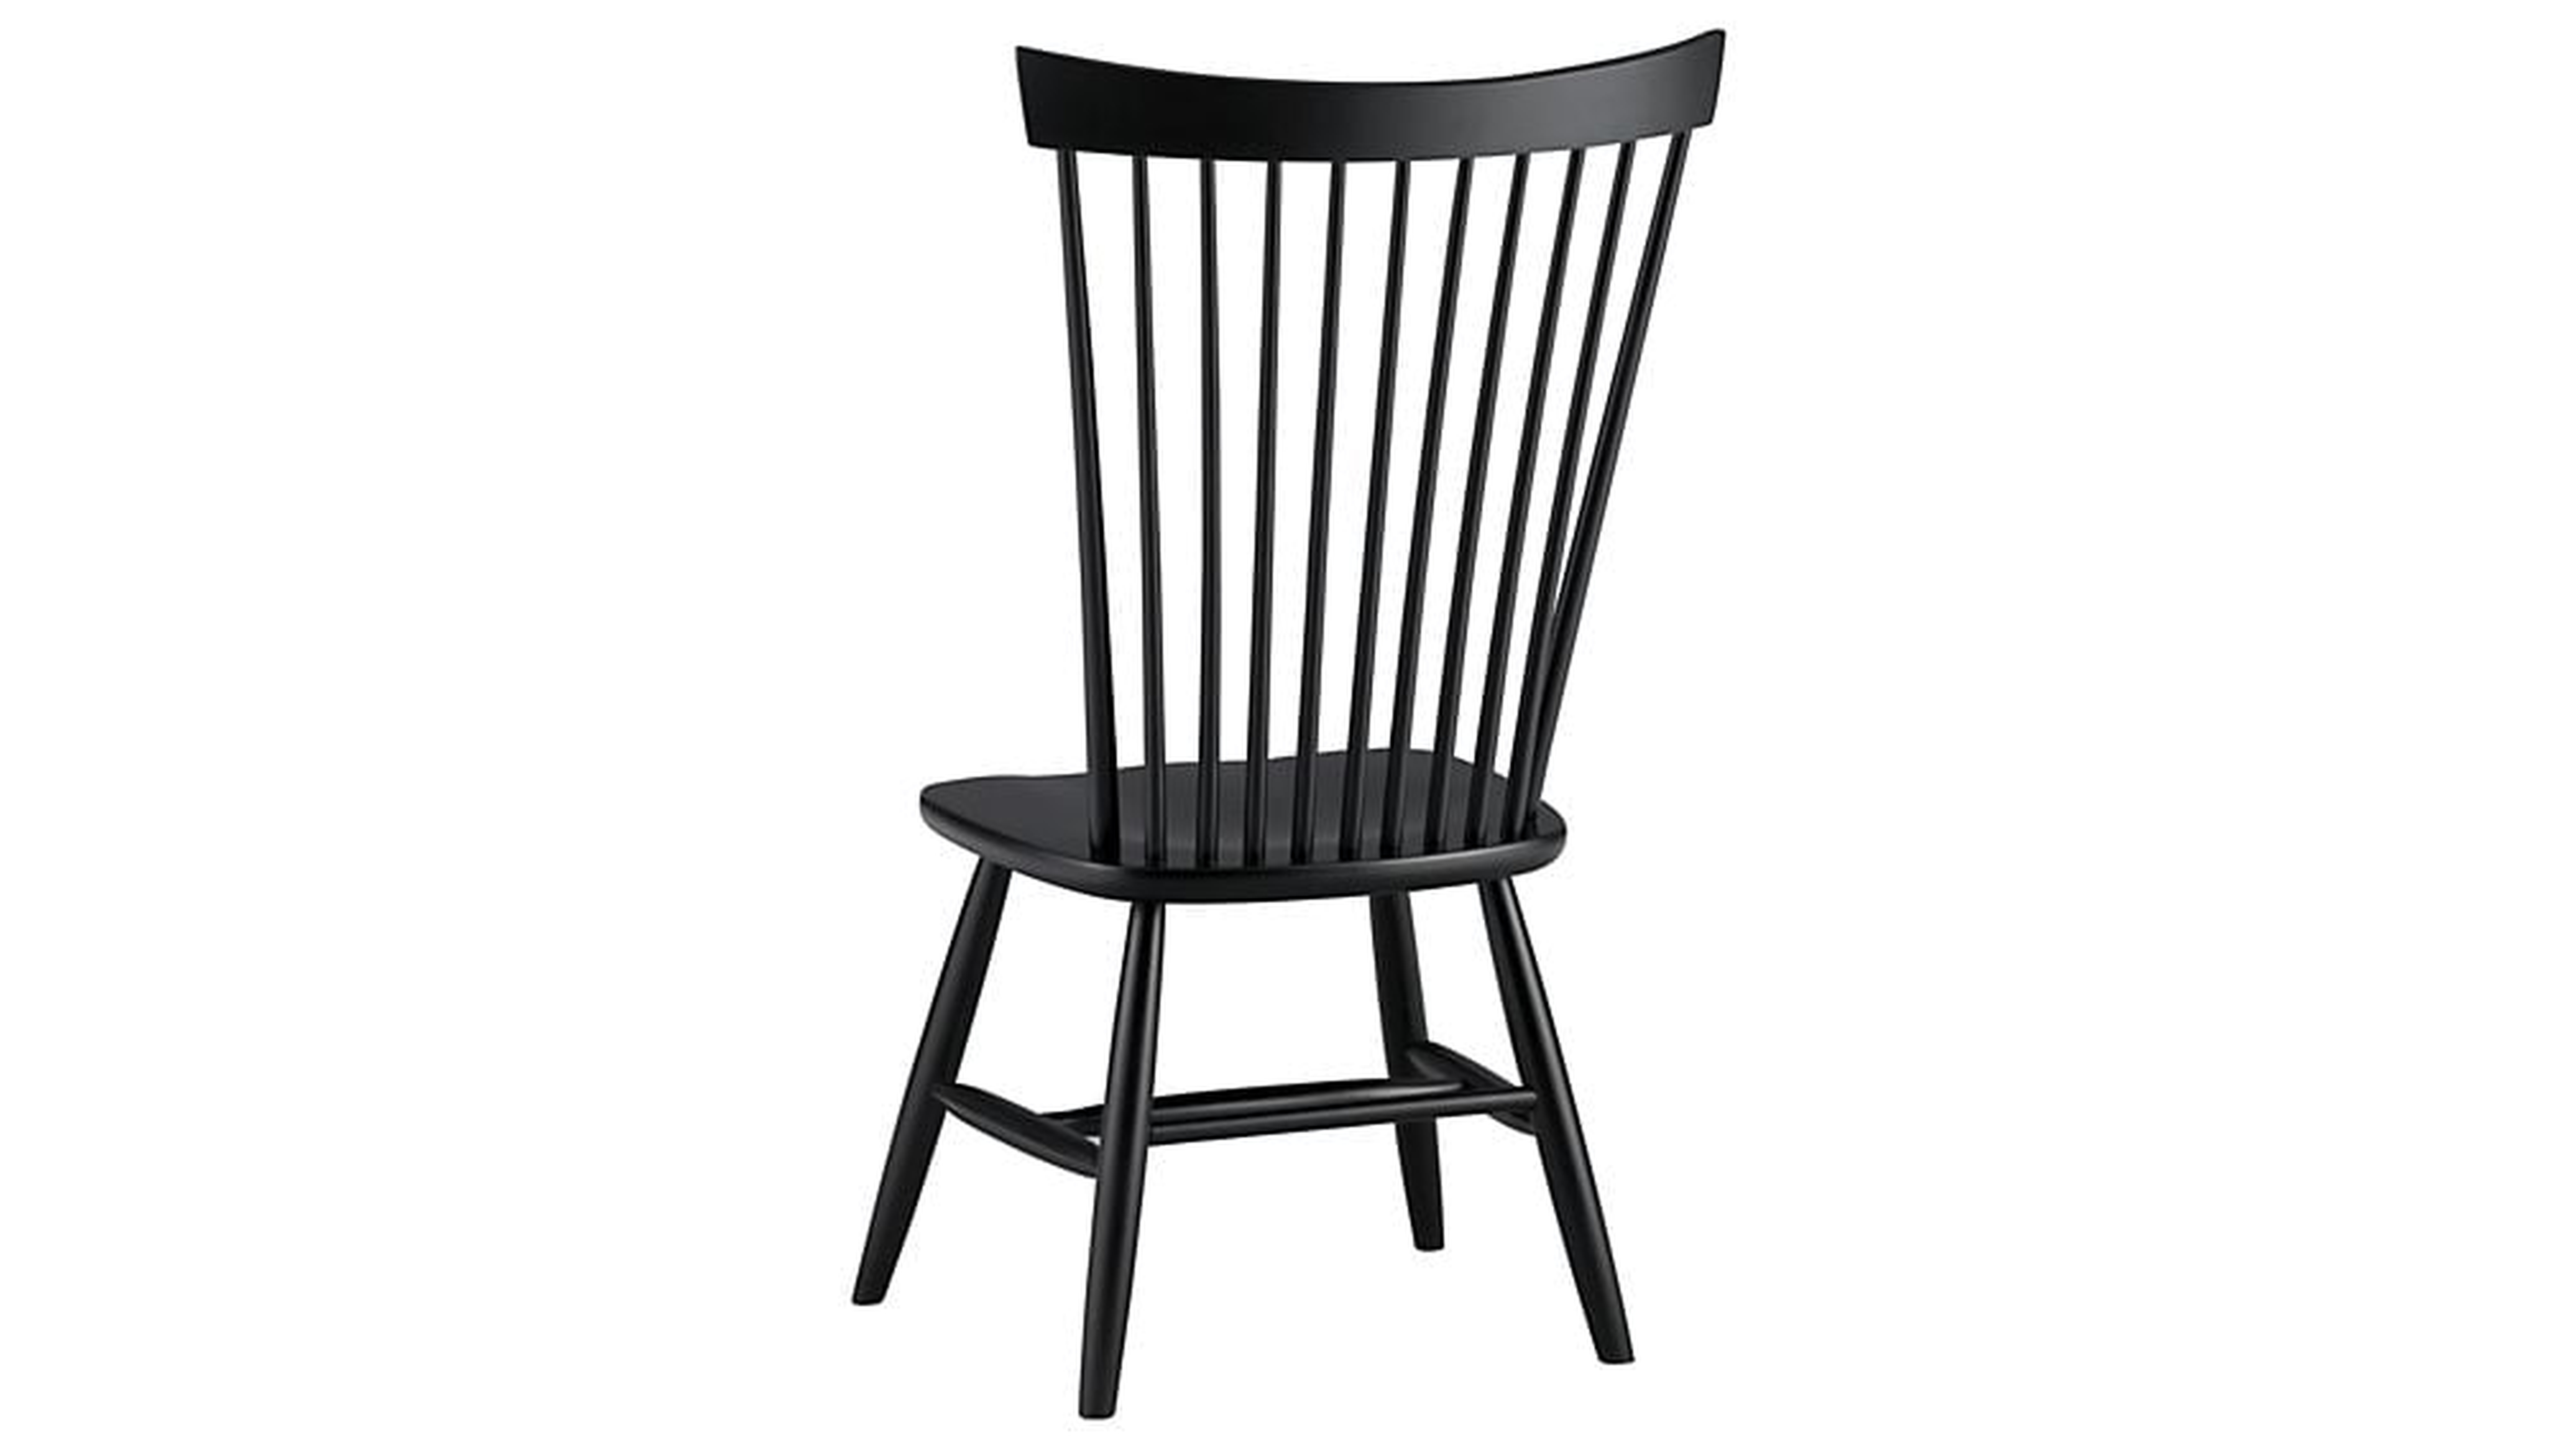 Marlow II Black Wood Dining Chair - Crate and Barrel